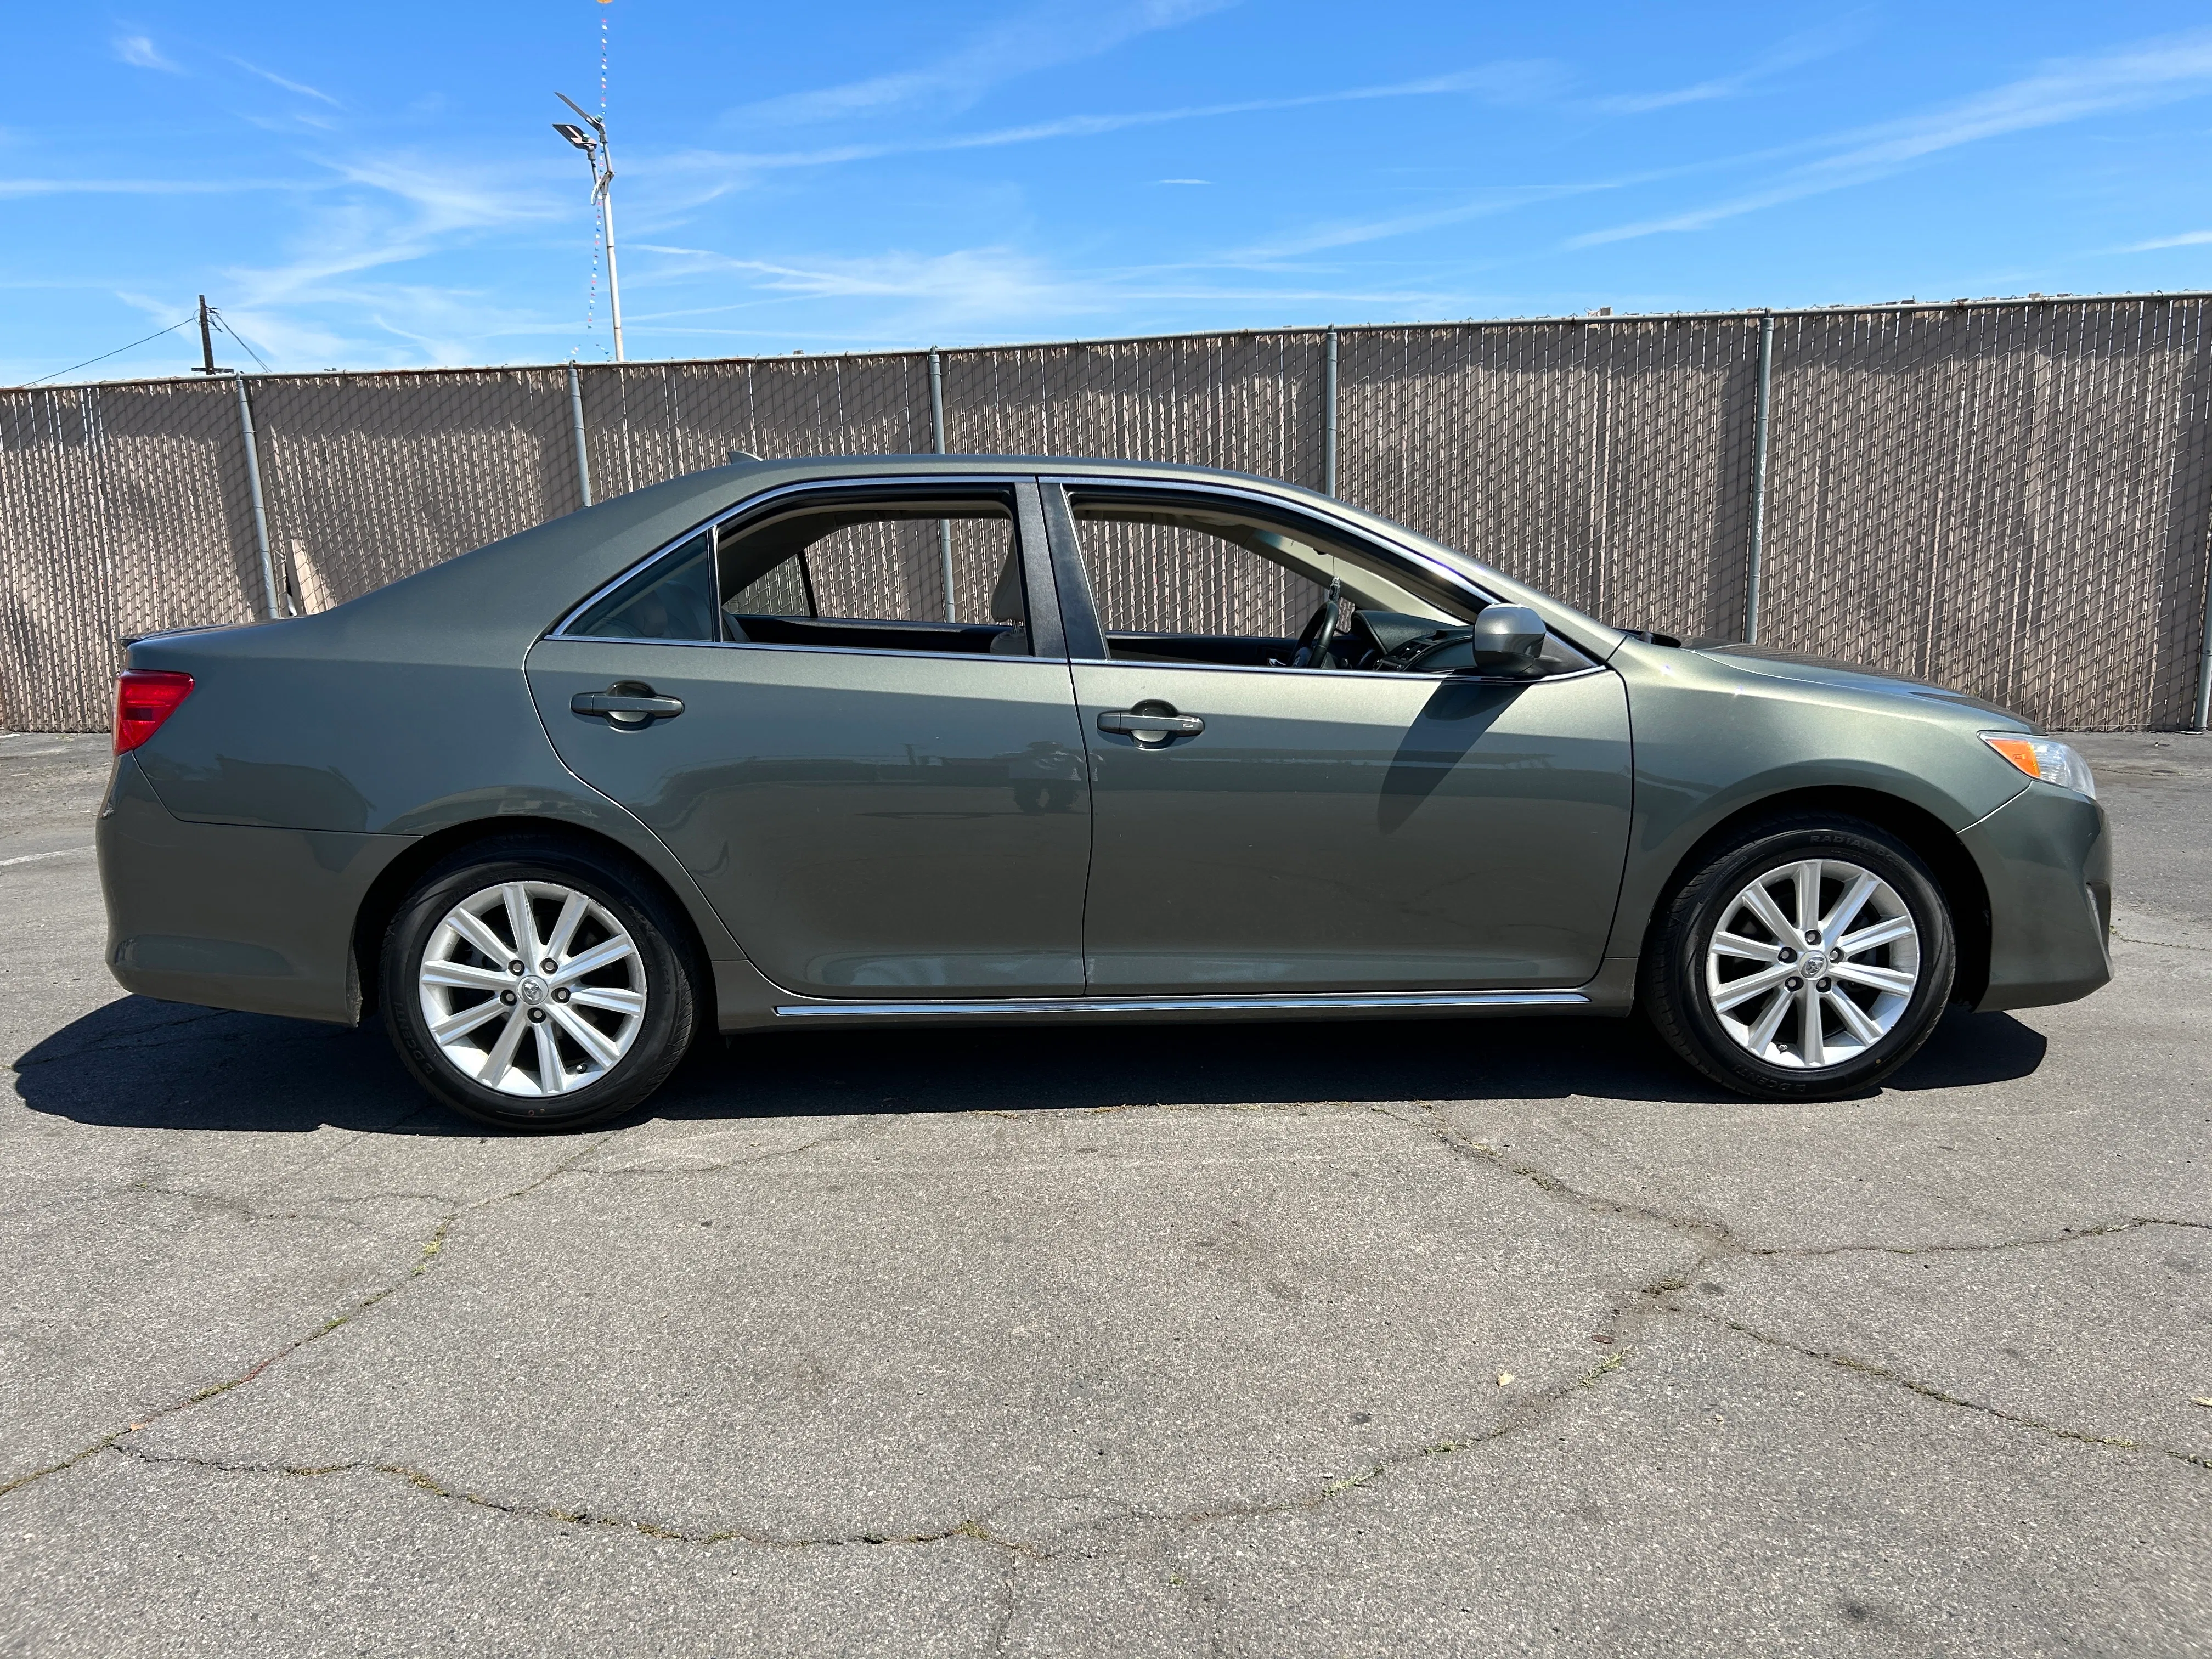 GREEN, 2012 TOYOTA CAMRY Image 3